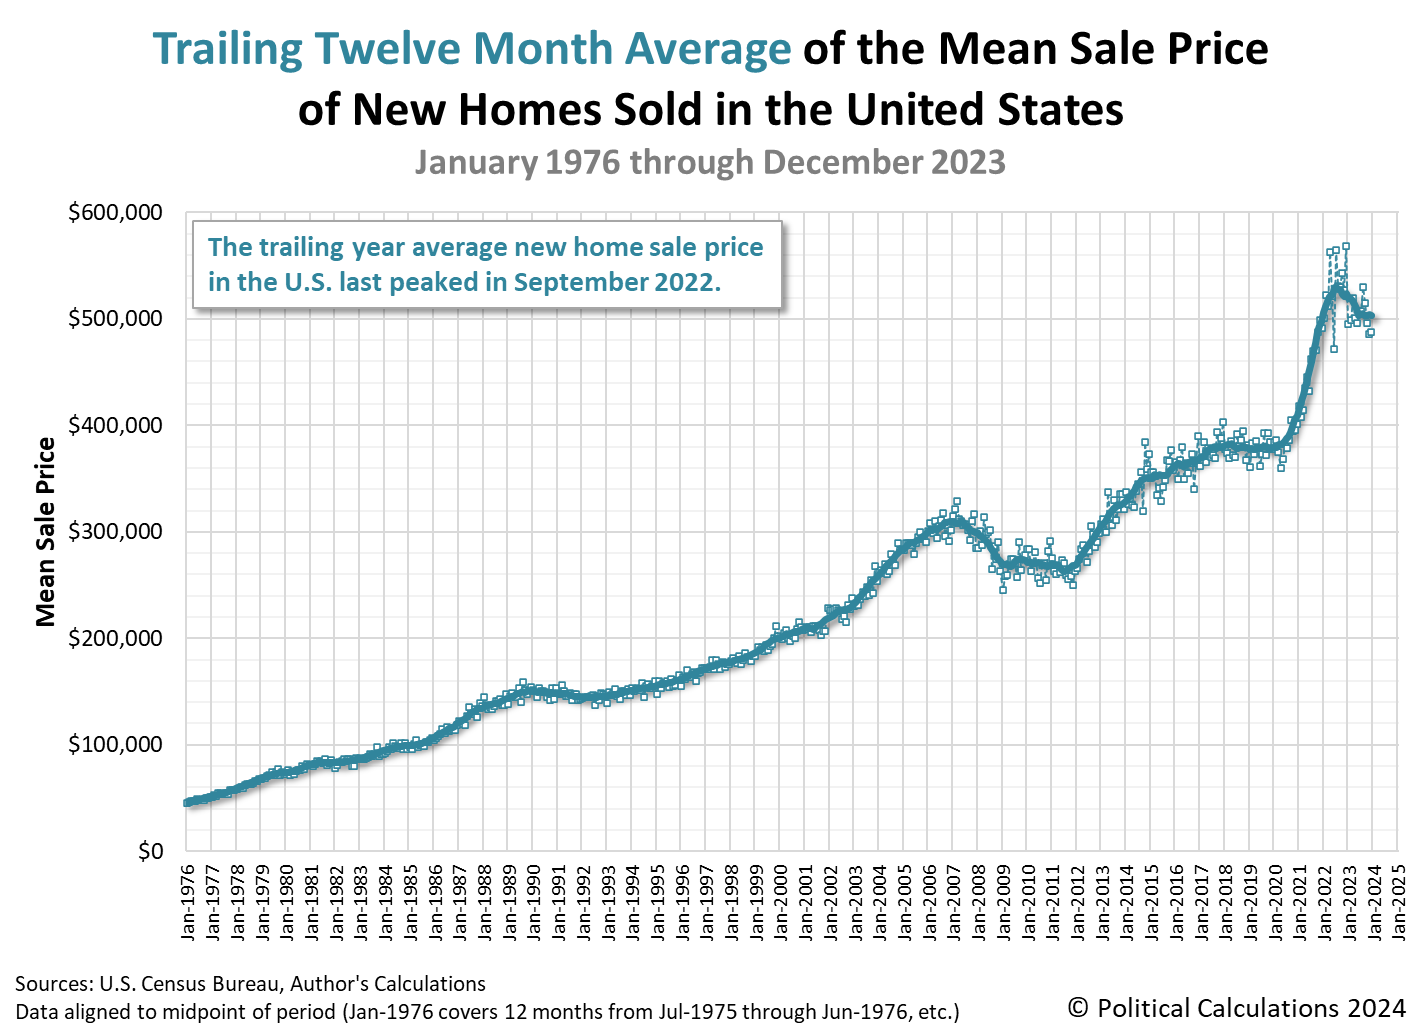 Trailing Twelve Month Average of the Mean Sale Price of New Homes Sold in the U.S., January 1976 - December 2023